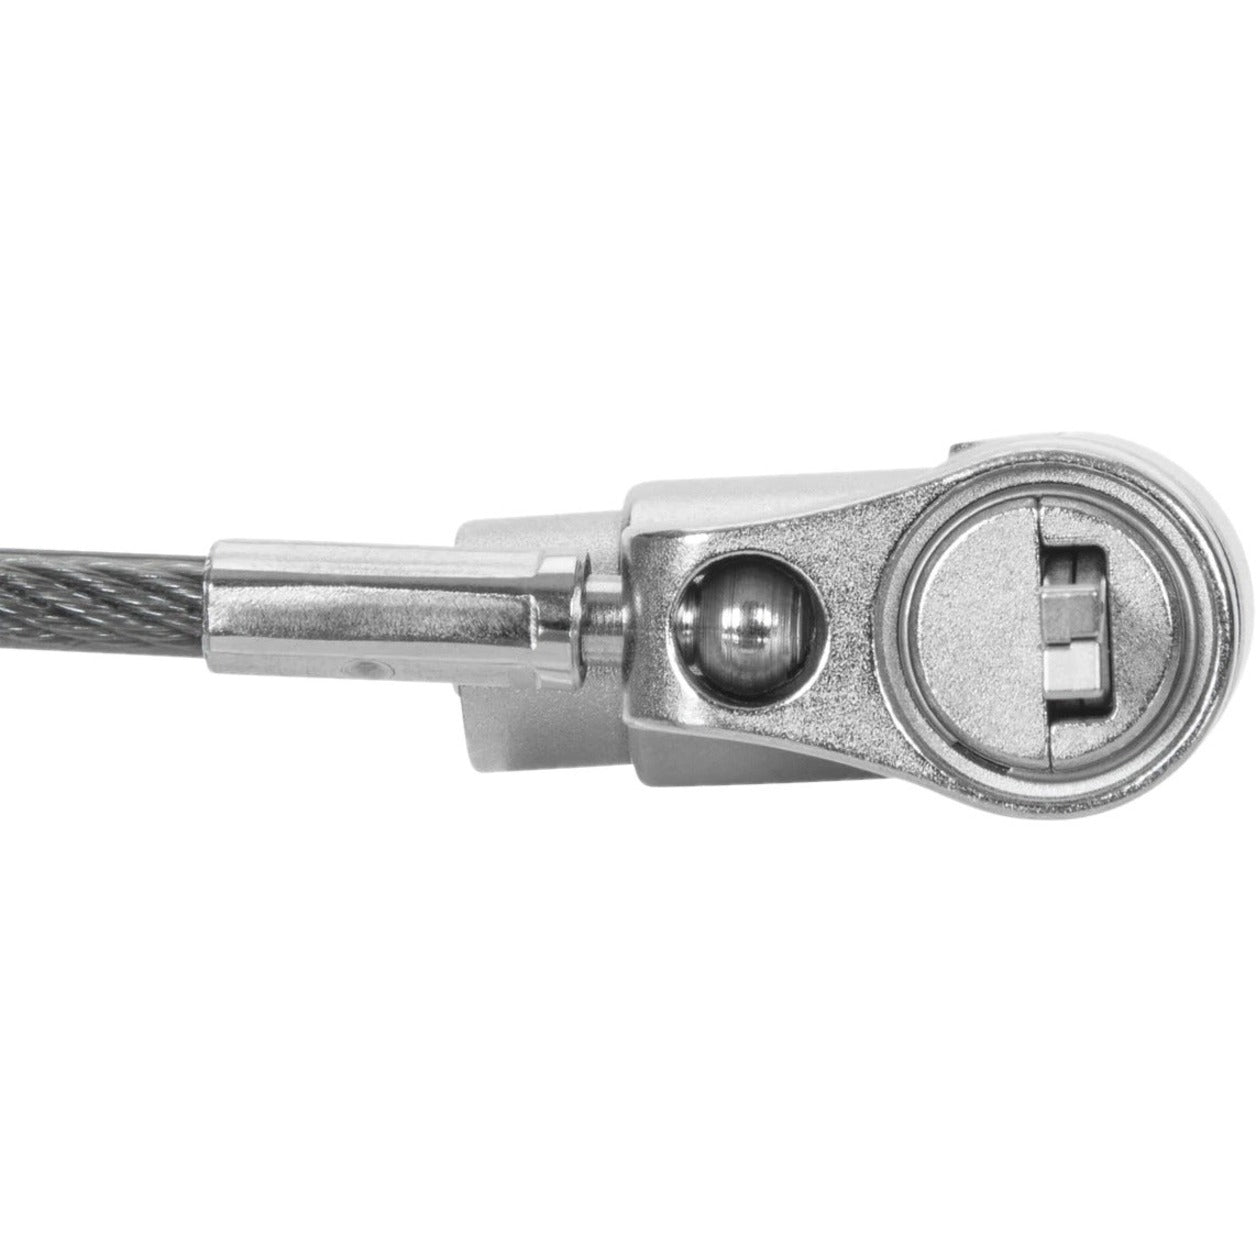 Targus ASP95GL DEFCON Ultimate Universal Keyed Single Head Lock, Retail - Secure Your Devices with Ease